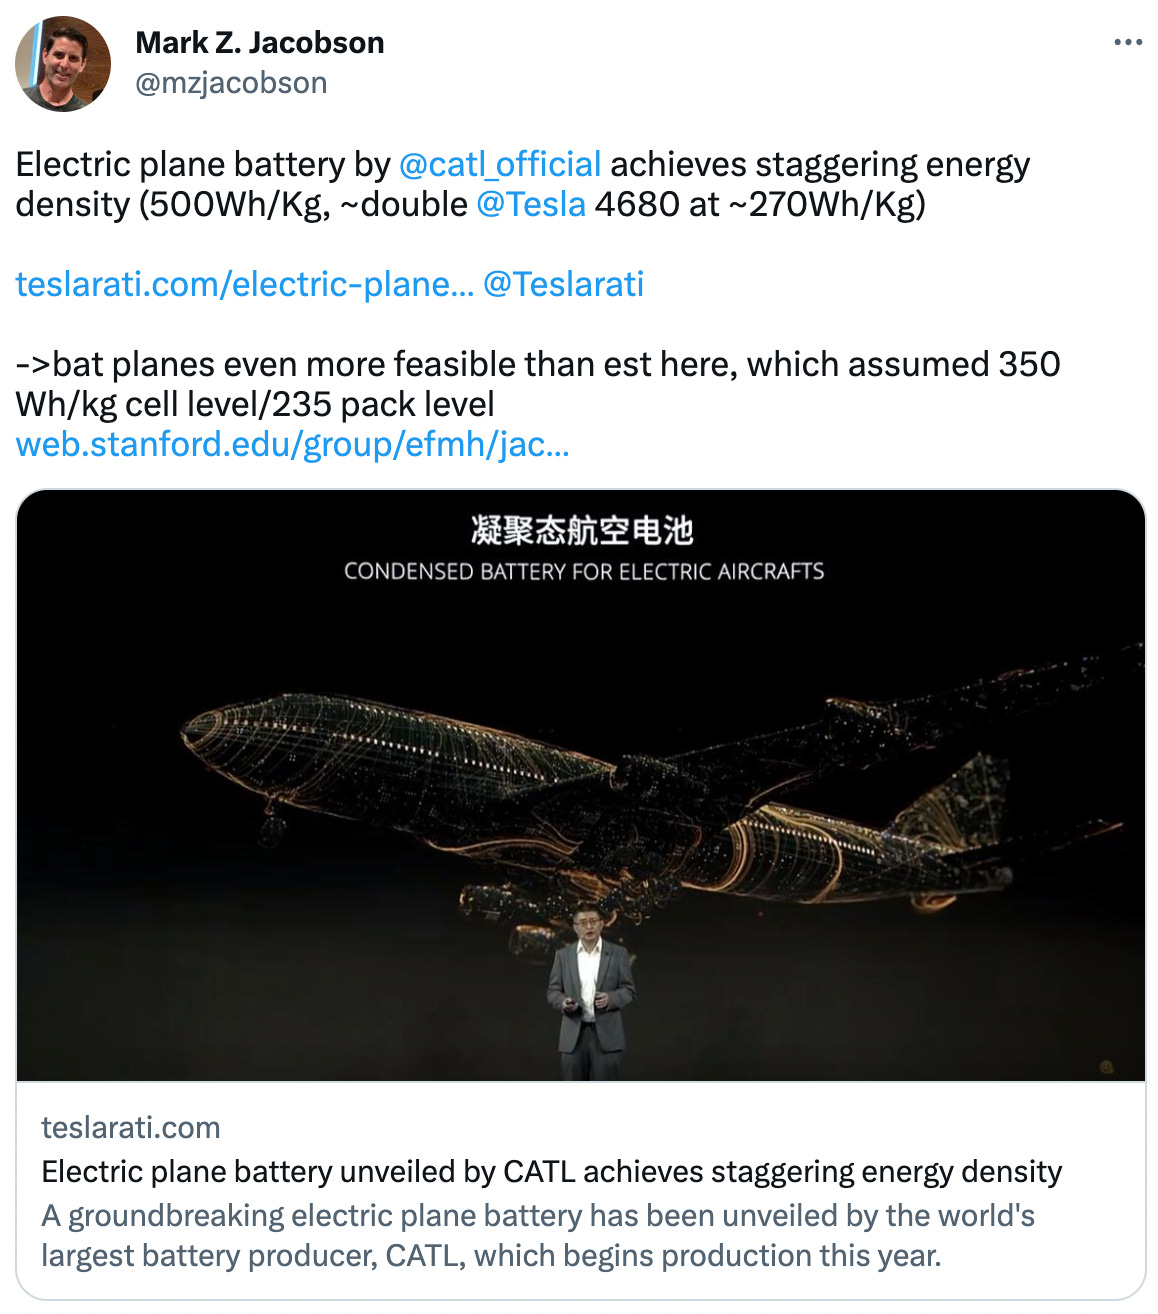 mzjacobson	"Electric plane battery by @catl_official achieves staggering energy density (500Wh/Kg, ~double @Tesla 4680 at ~270Wh/Kg)  https://t.co/0JGTBX0rMX @Teslarati   -&gt;bat planes even more feasible than est here, which assumed 350 Wh/kg cell level/235 pack level https://t.co/uRCw5hOPqp"